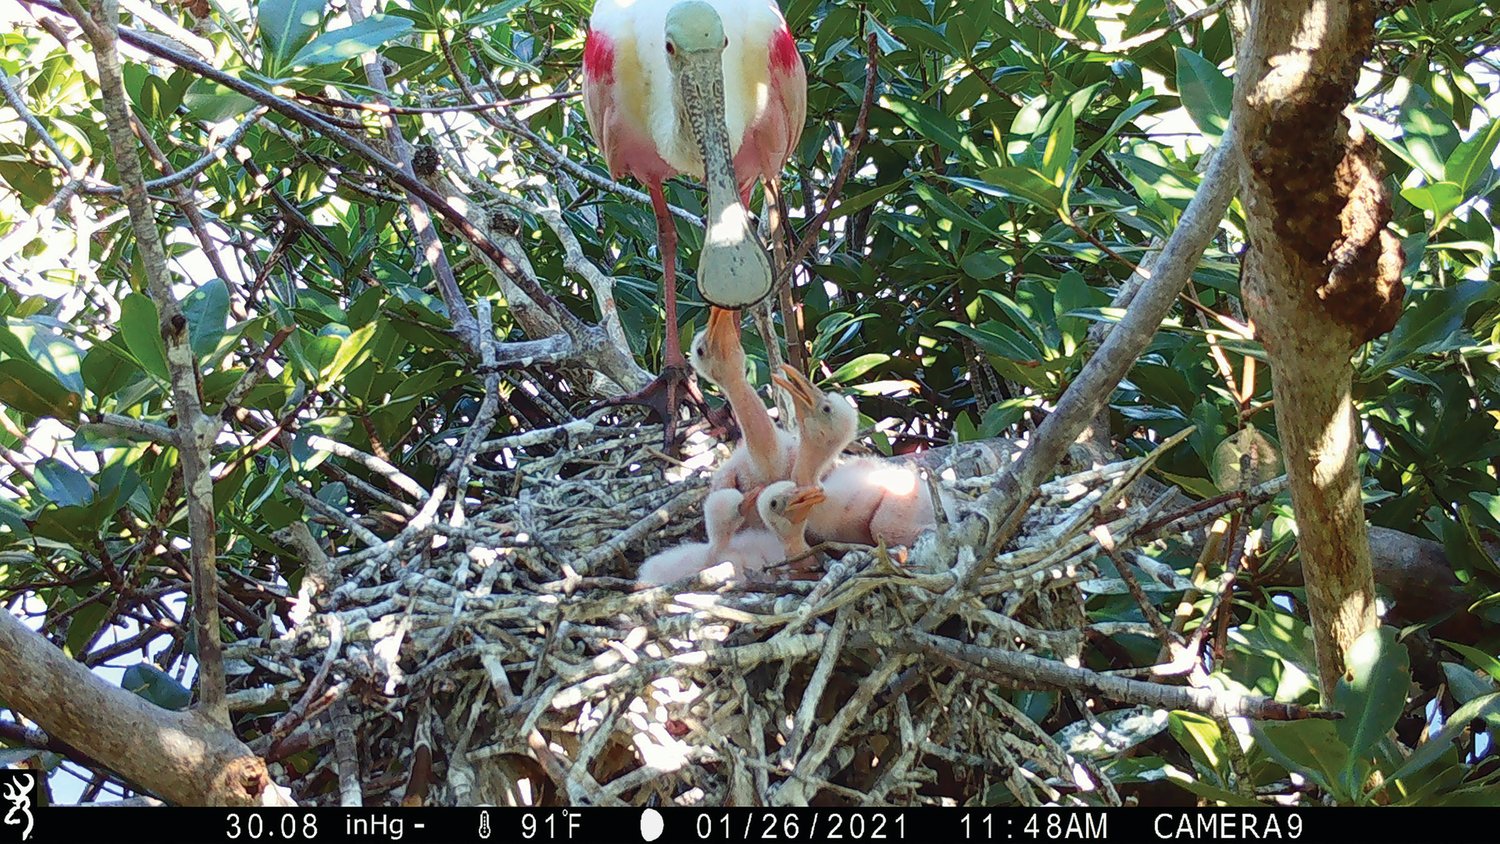 A trail camera image shows a Roseate Spoonbill feeding young at its nest in Florida Bay.